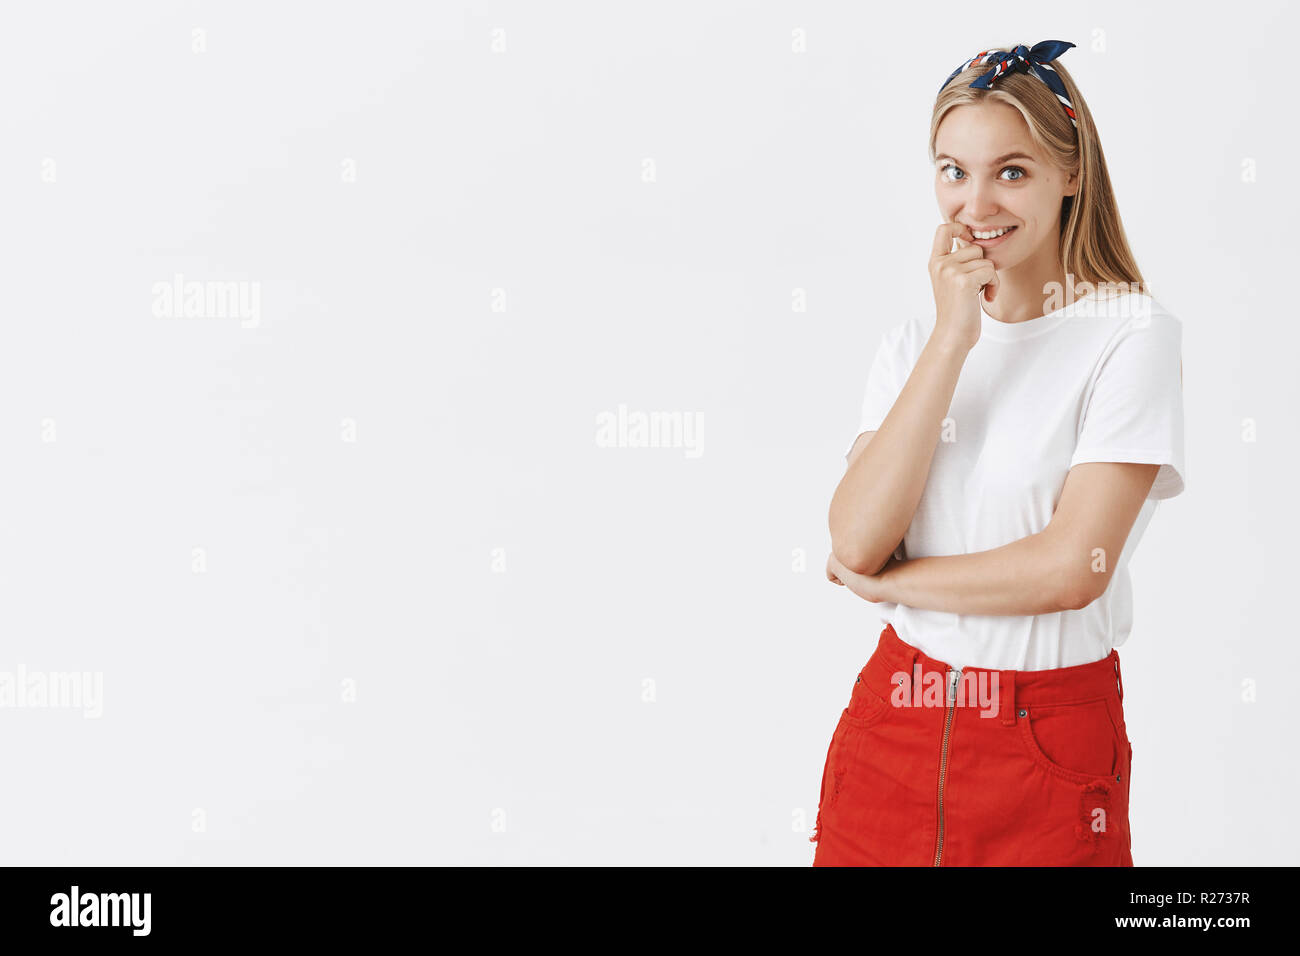 Studio shot of curious good-looking stylish caucasian girl with fair hair in headband and trendy red skirt, biting fingernail and smiling wanting some Stock Photo